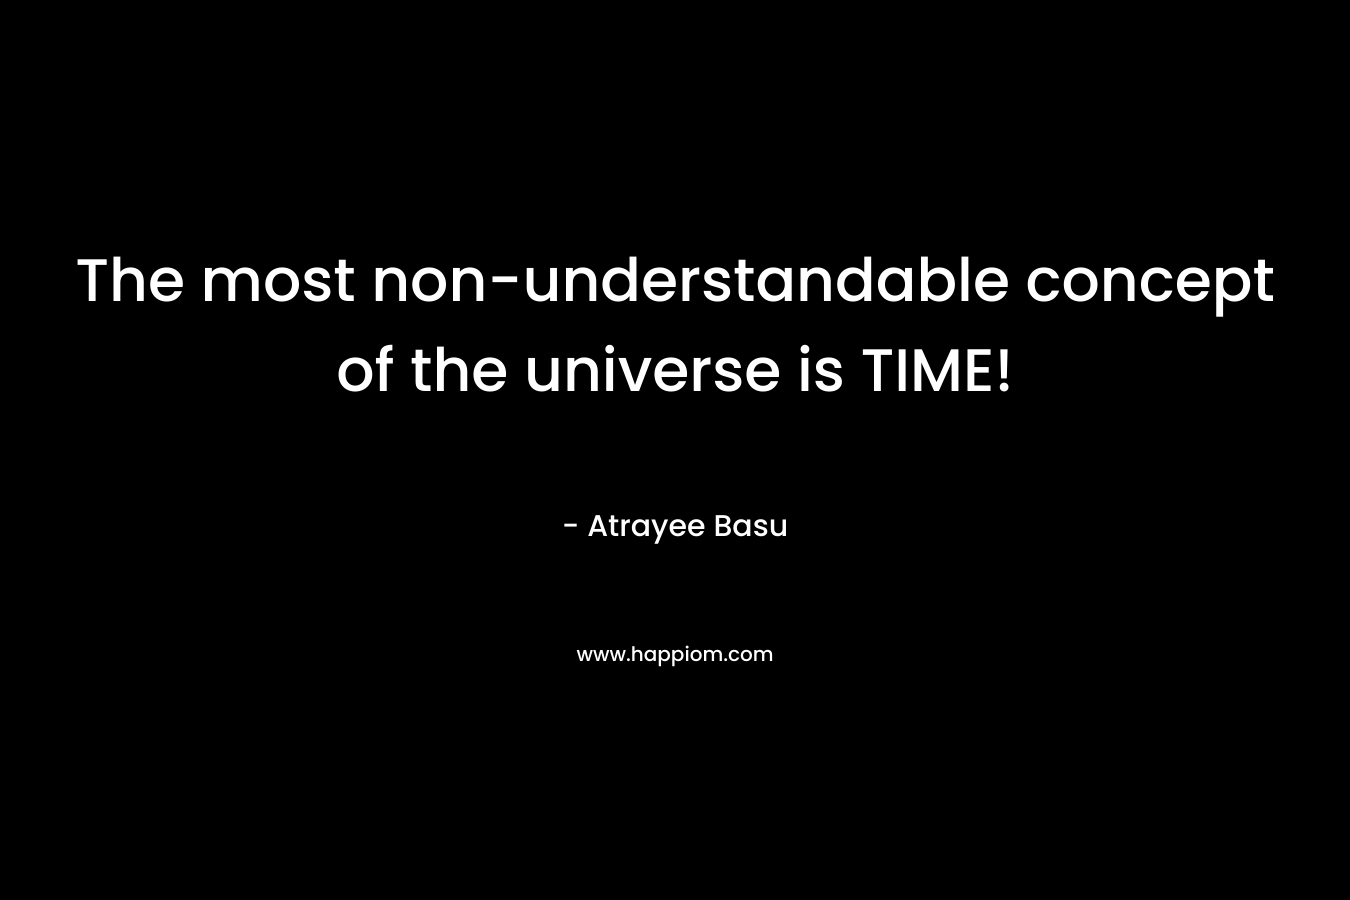 The most non-understandable concept of the universe is TIME!